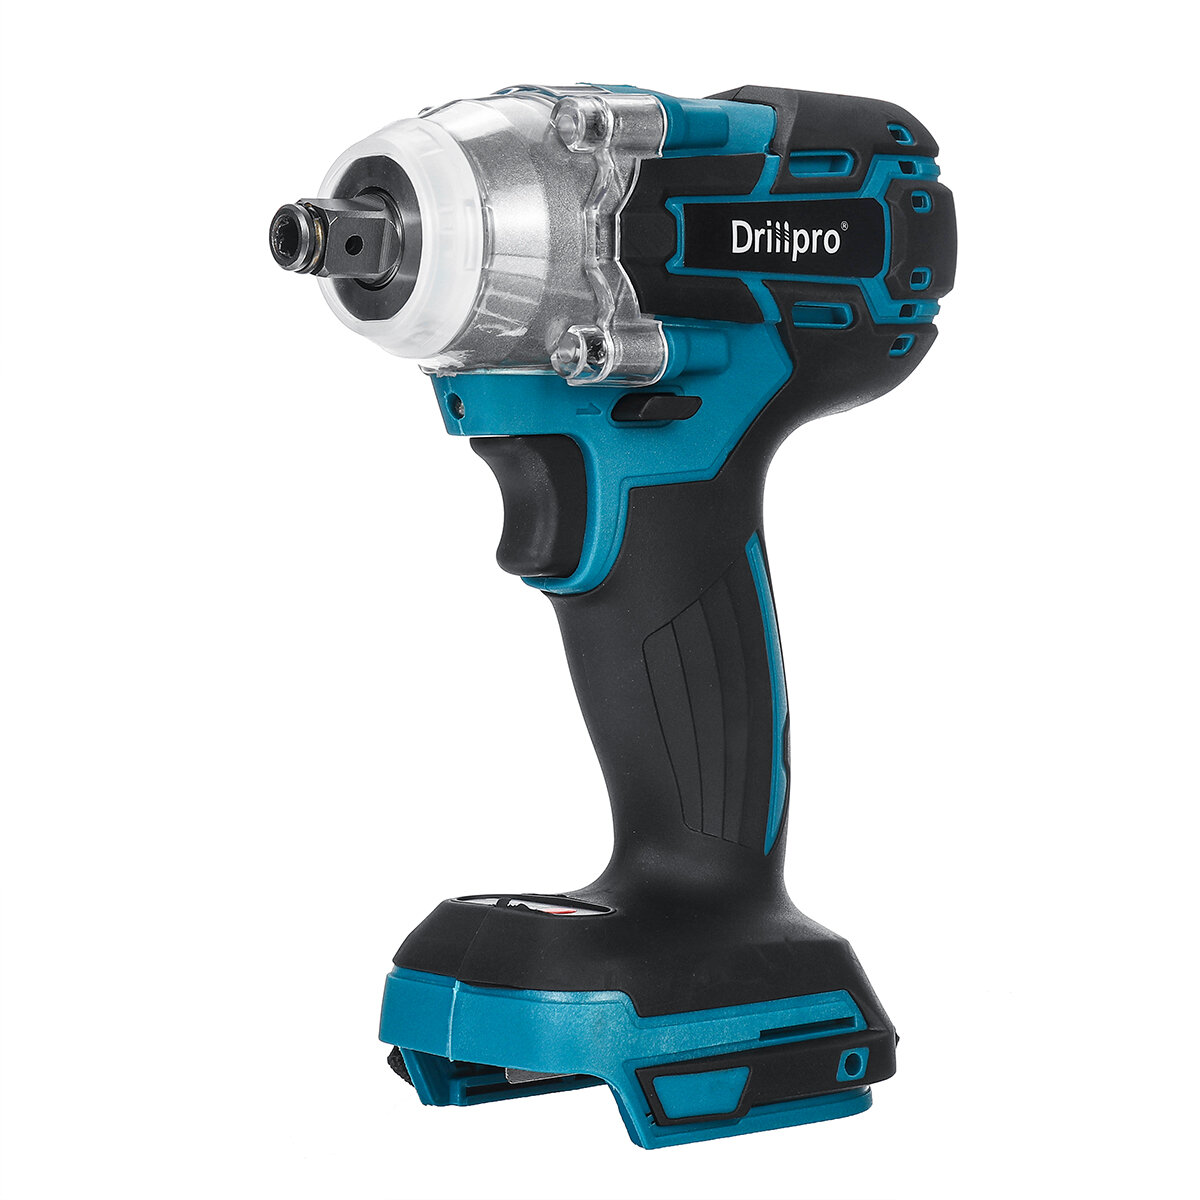 Image of Drillpro 18V Cordless Brushless Impact Wrench Electric Screwdriver Stepless Speed Change